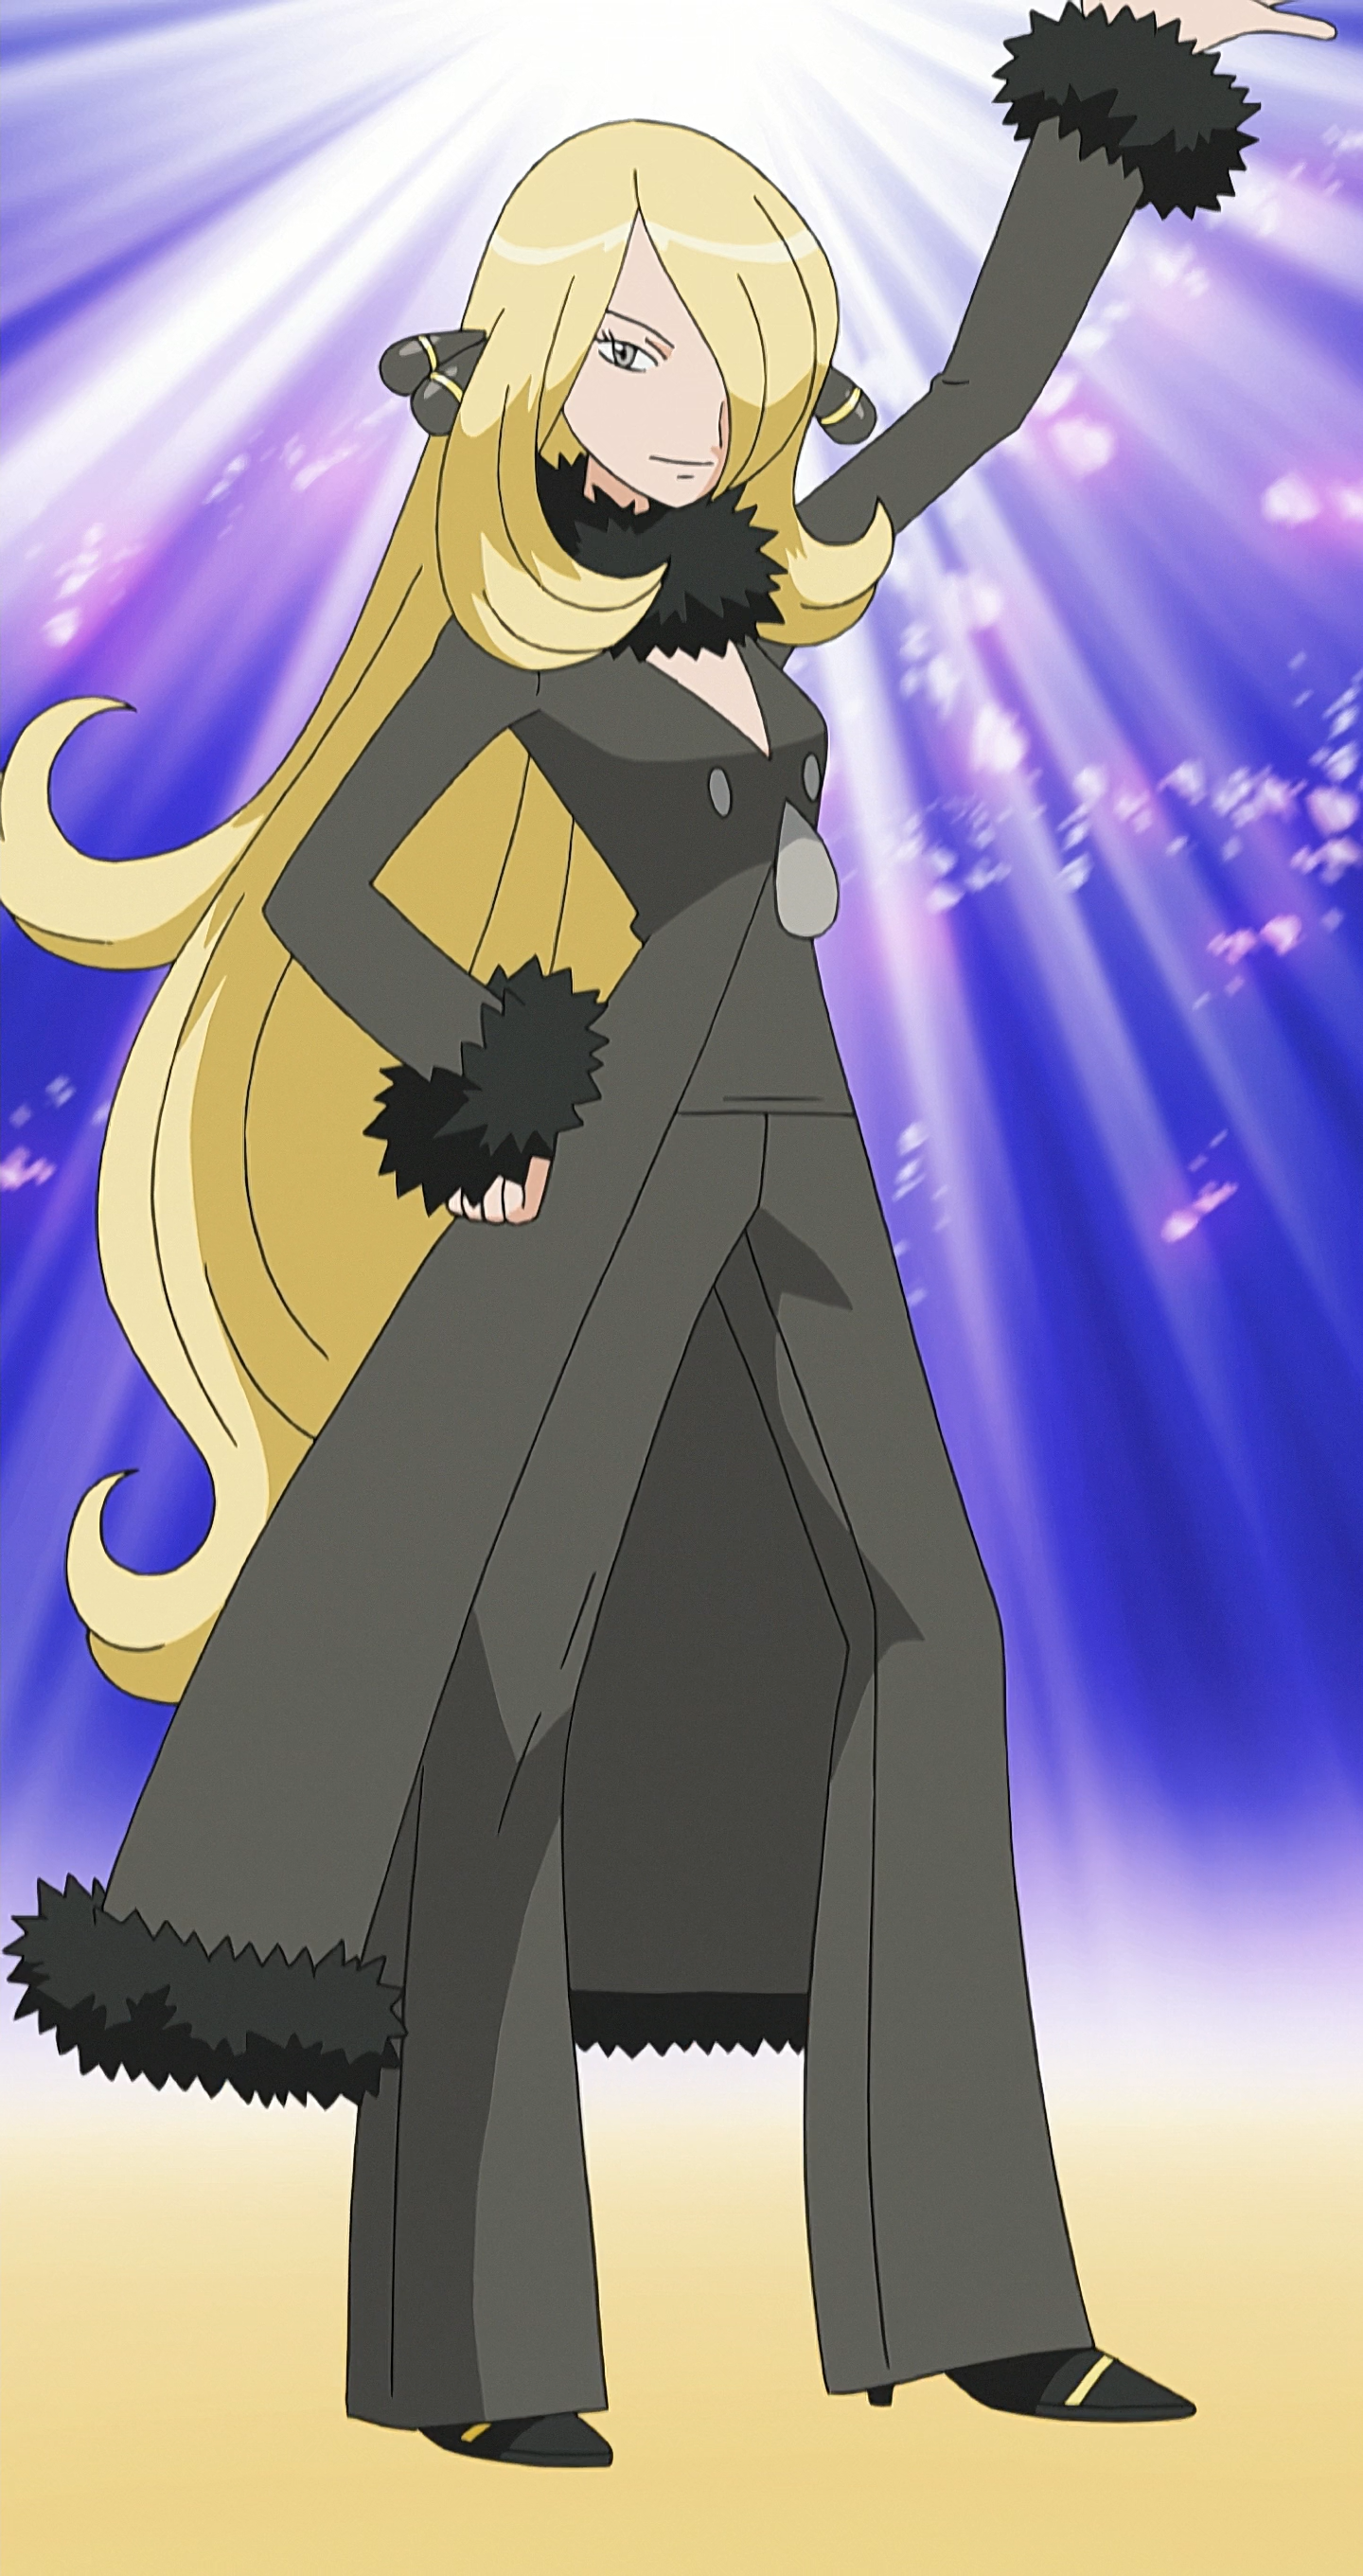 Dream Cynthia is a character appearing in Pokémon: Diamond and Pearl. 